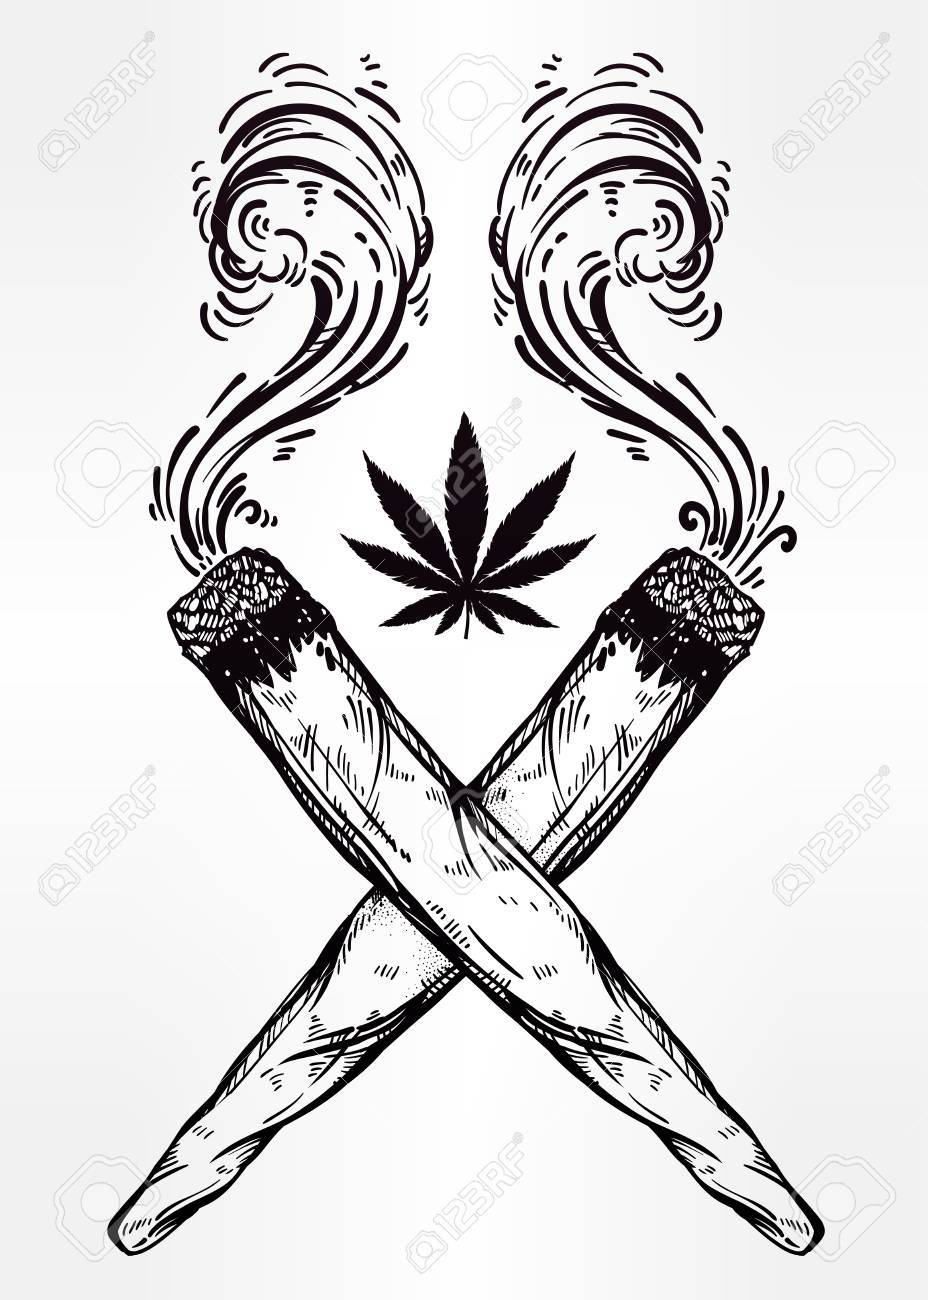 Weed Joint Drawing at GetDrawings Free download